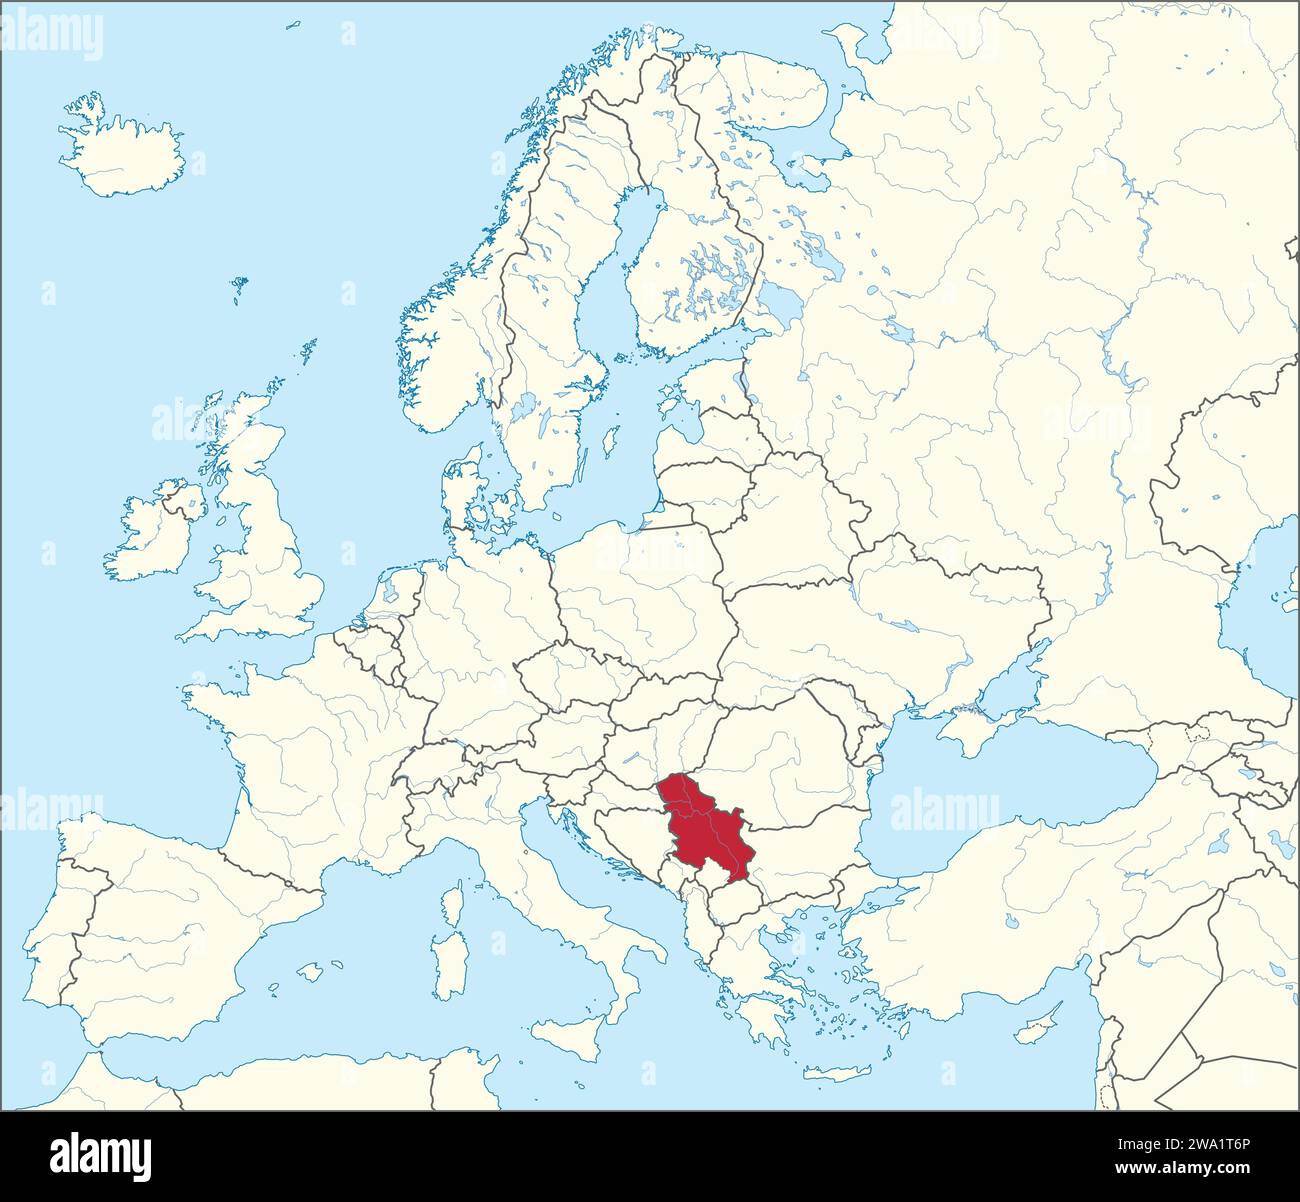 Location map of the REPUBLIC OF SERBIA, EUROPE Stock Vector